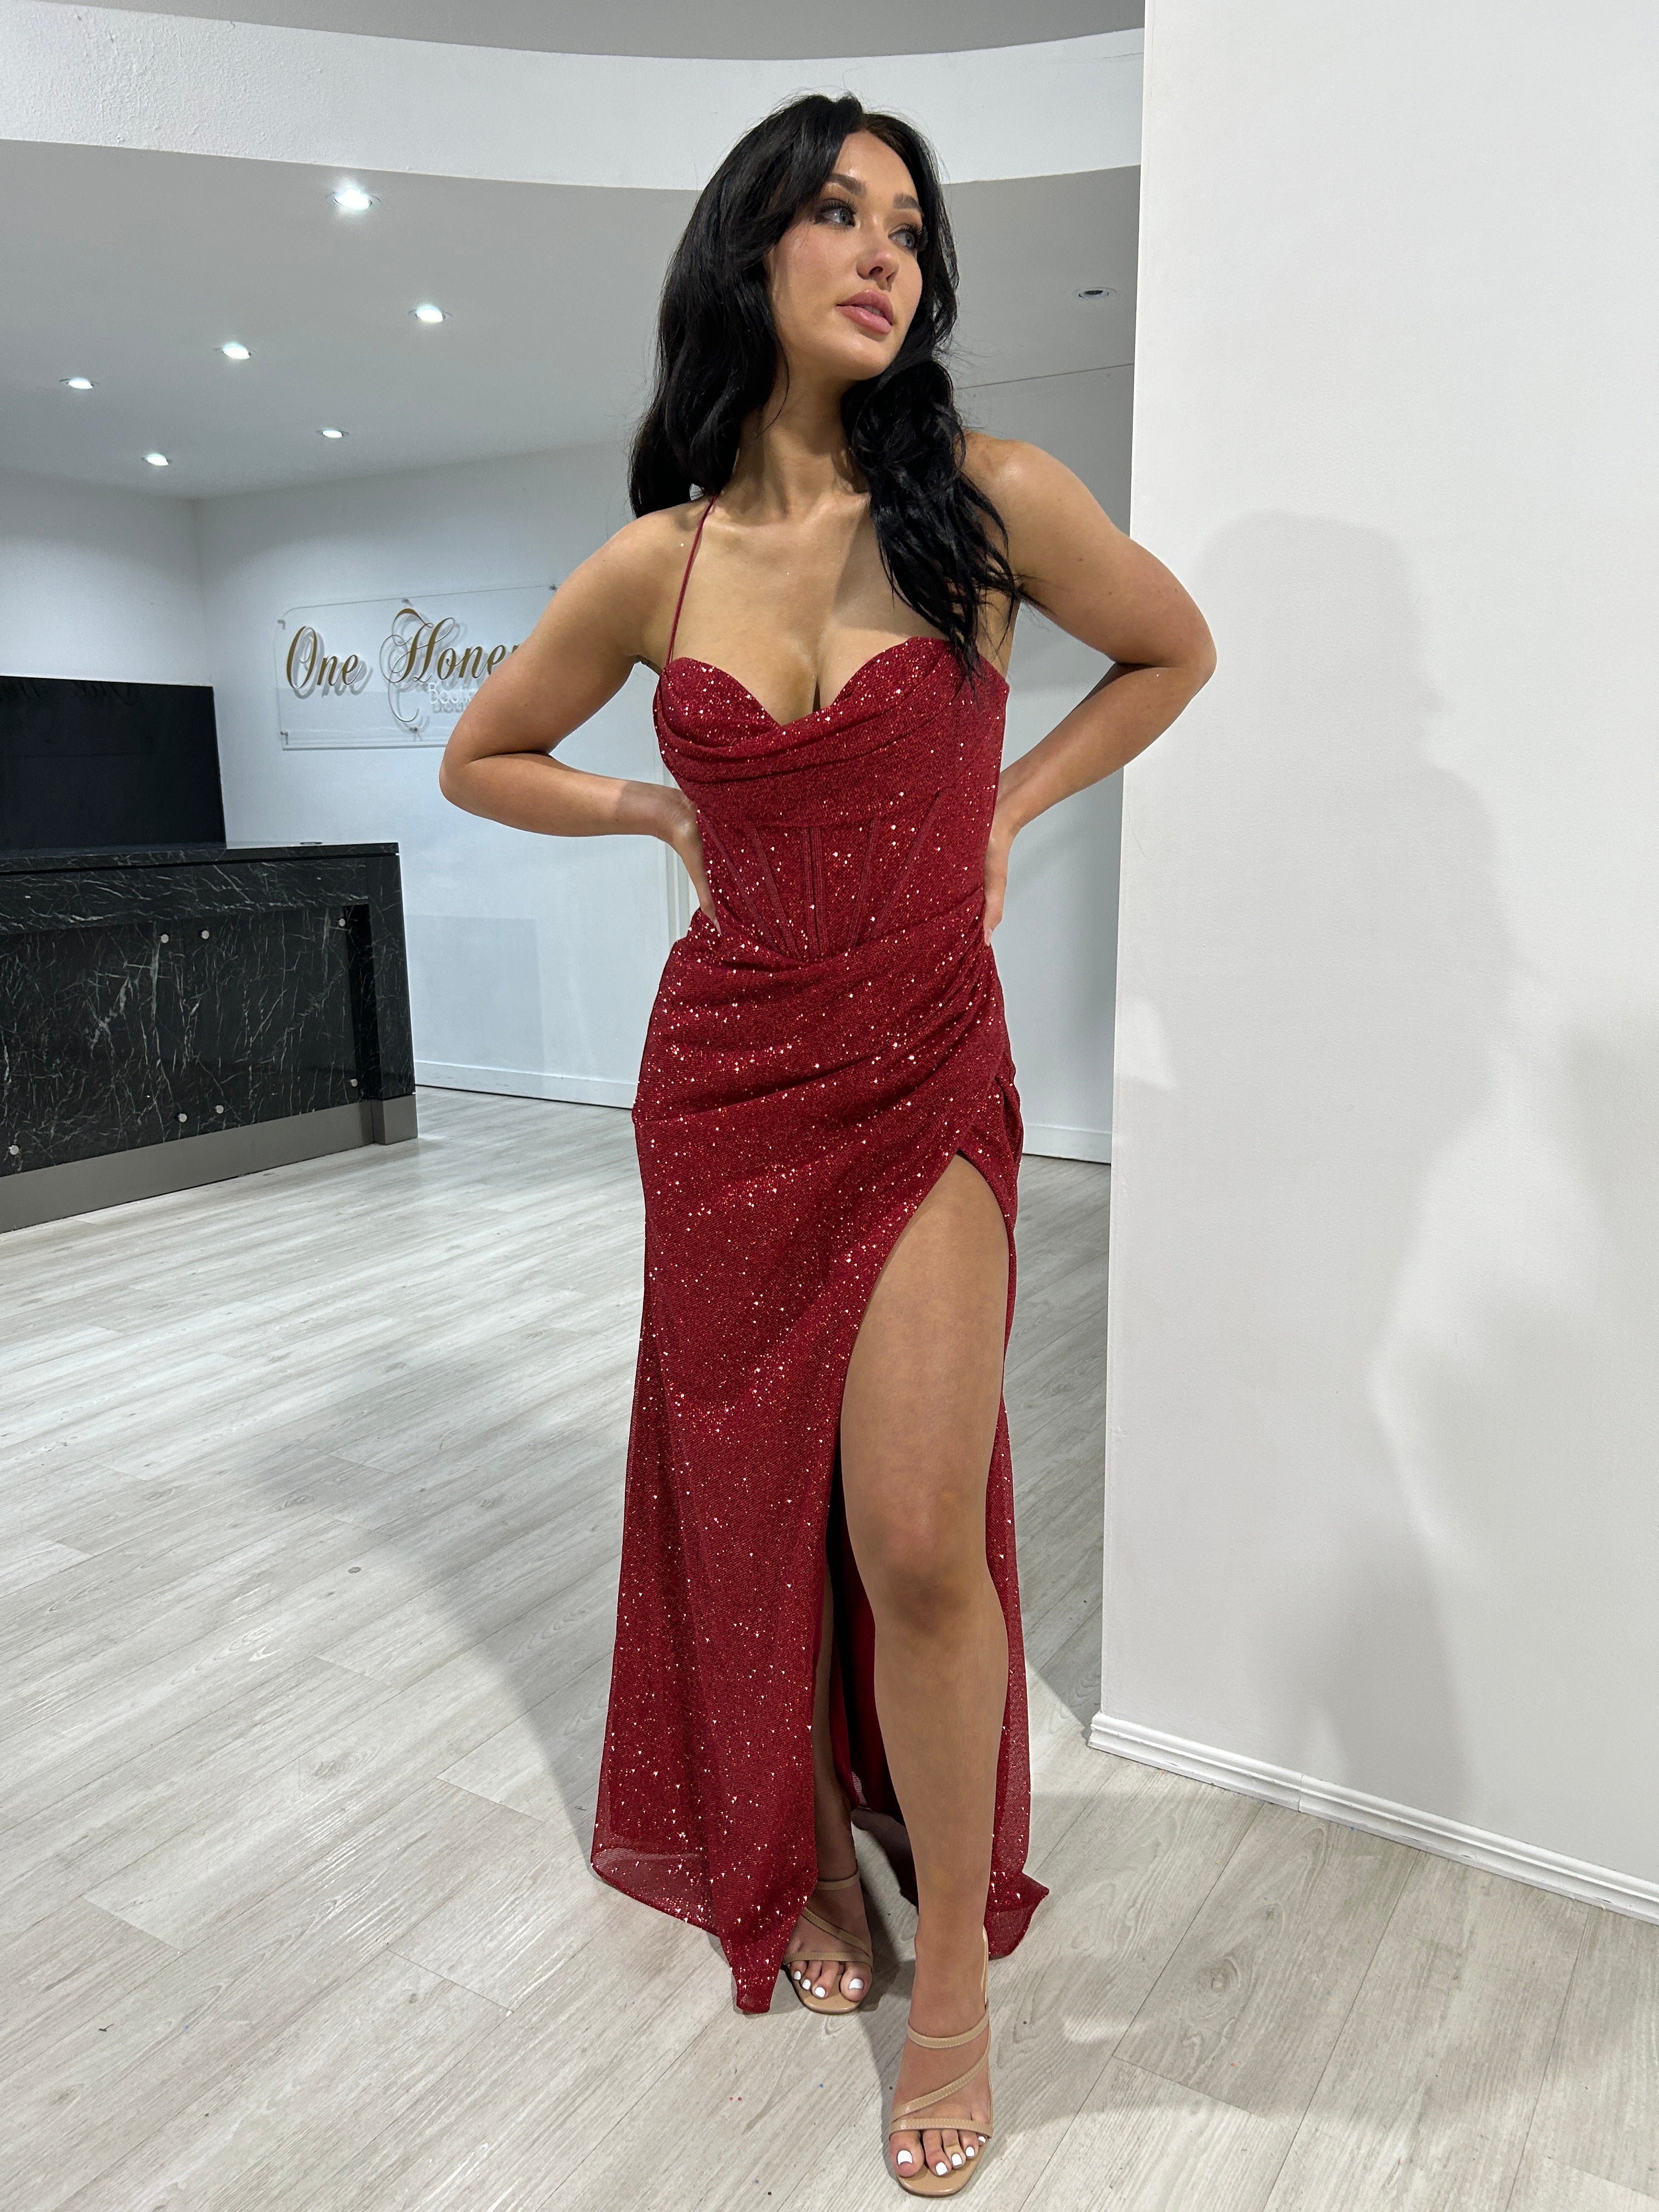 Honey Couture DAYA Red Glitter Corset Bustier Mermaid Formal Gown Dress